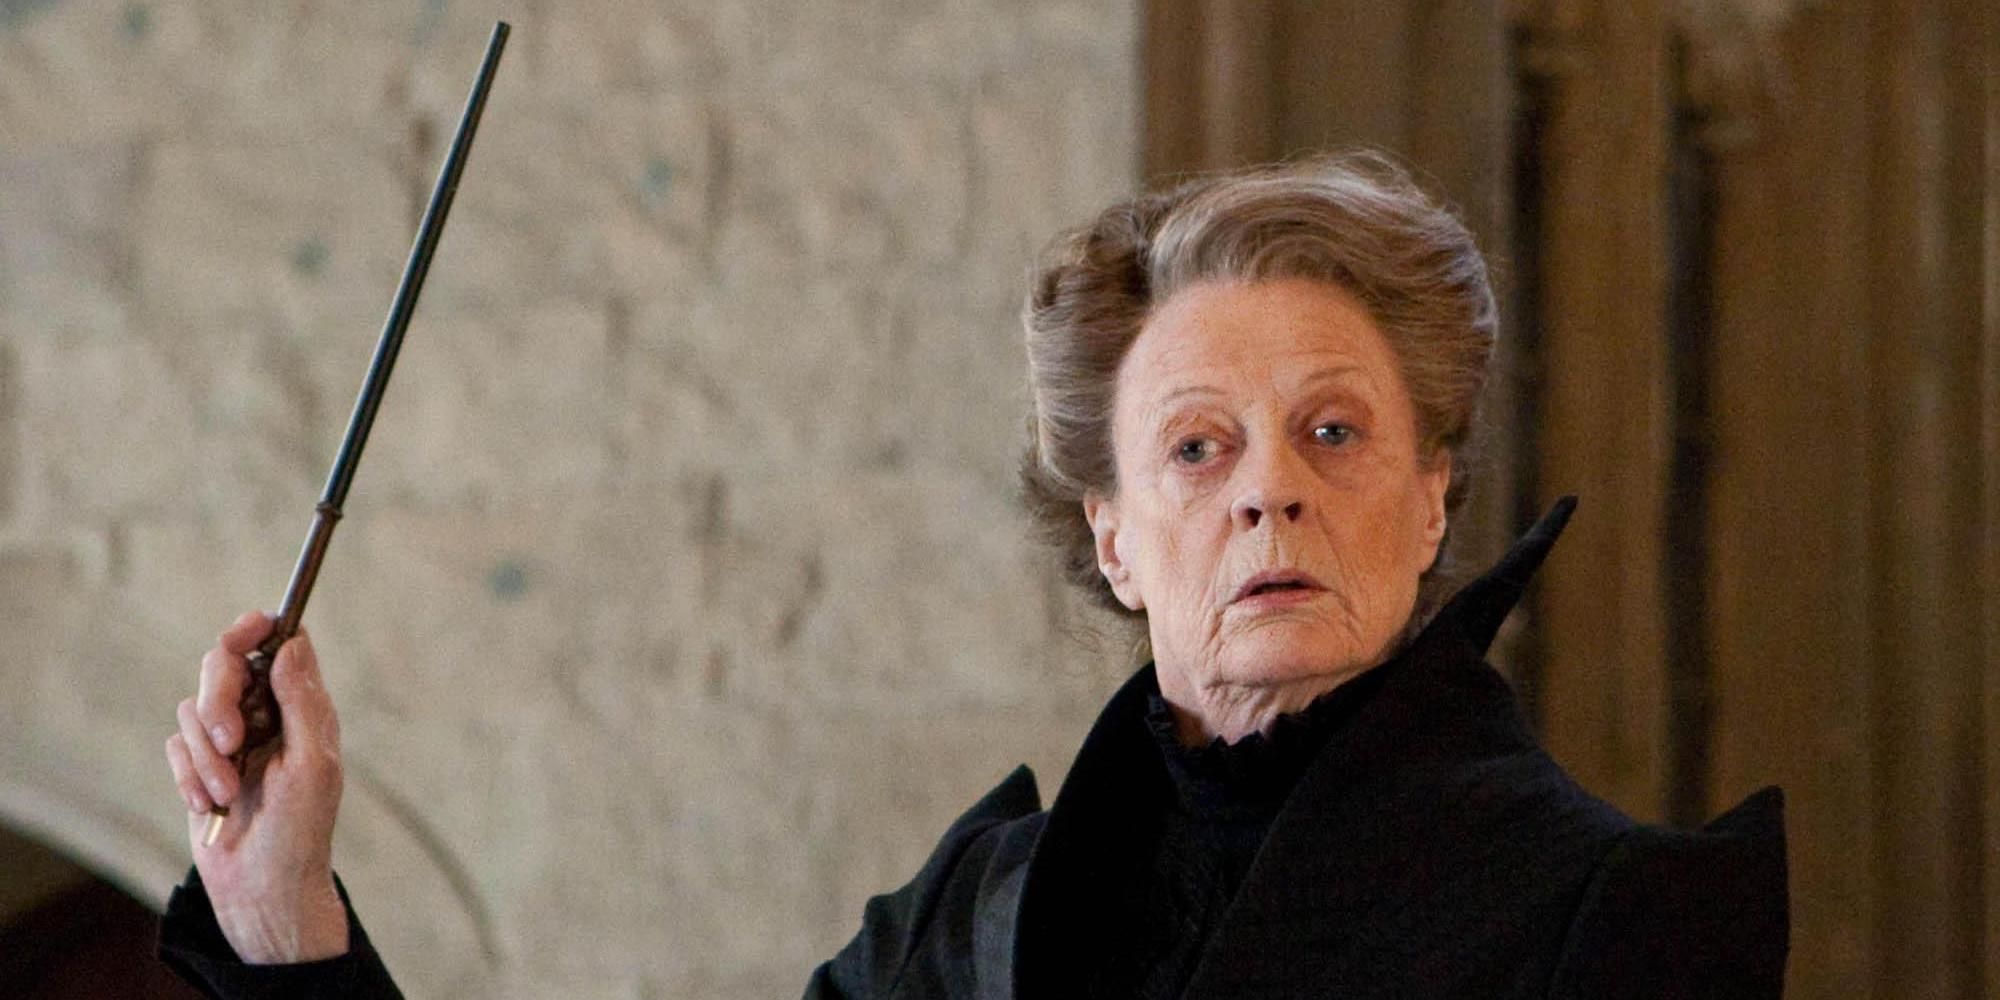 Professor McGonagall holding a wand in Harry Potter